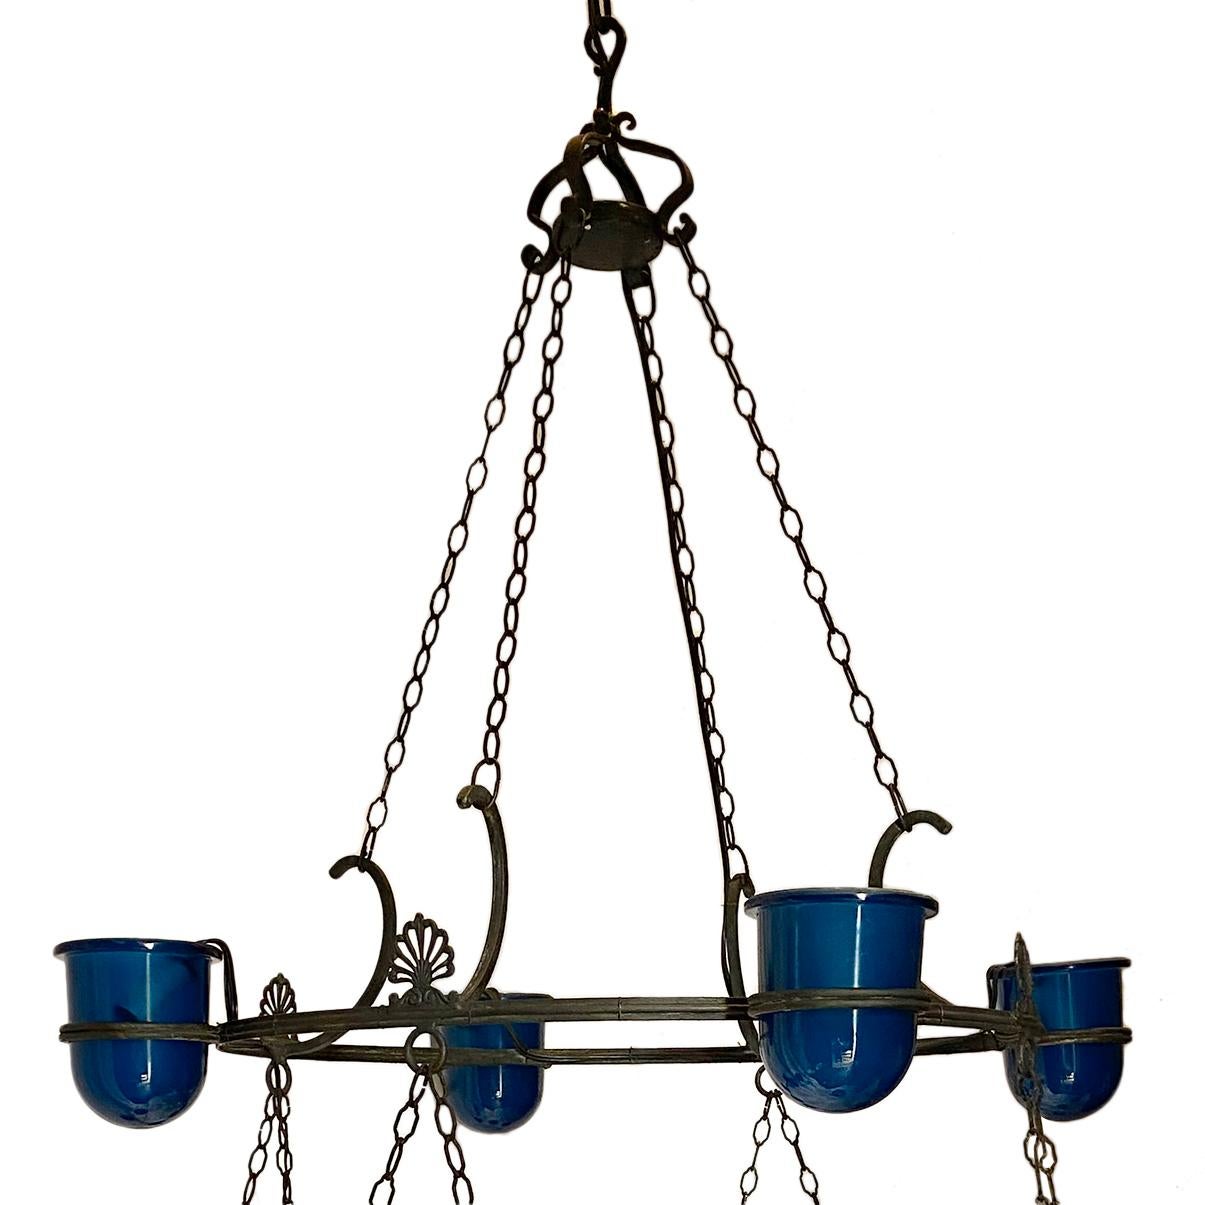 A large circa 1900s sixteen light patinated and cast bronze Venetian chandelier with aqua blue glass insets.

Measurements:
Height: 53? (Adjustable)
Diameter: 42.5?